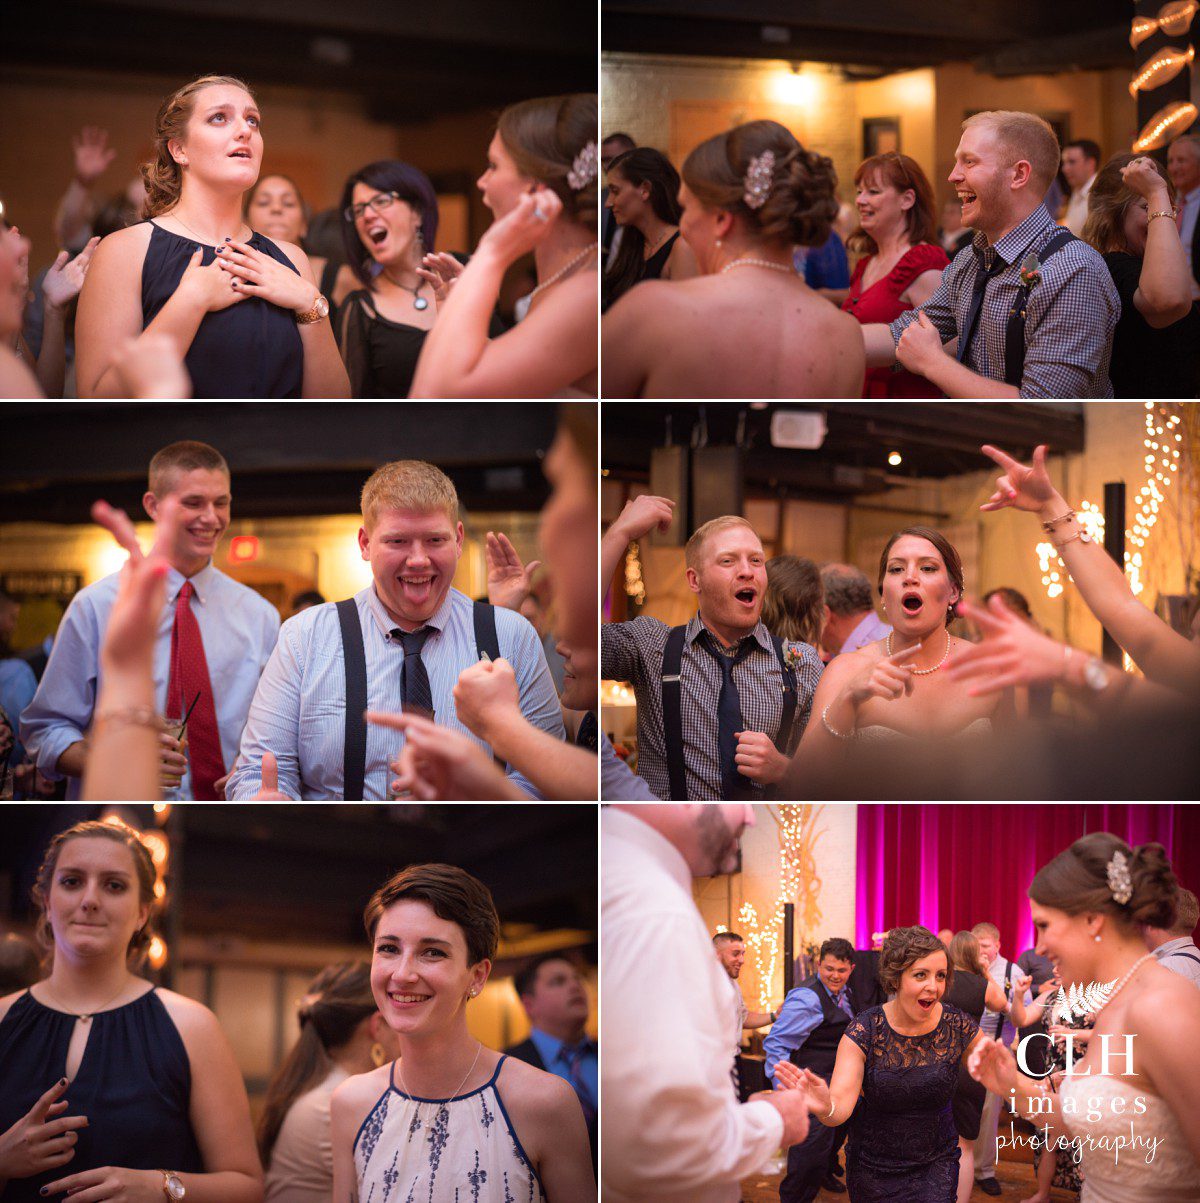 clh-images-photography-revolution-hall-wedding-troy-ny-wedding-albany-wedding-photography-troy-wedding-photography-148